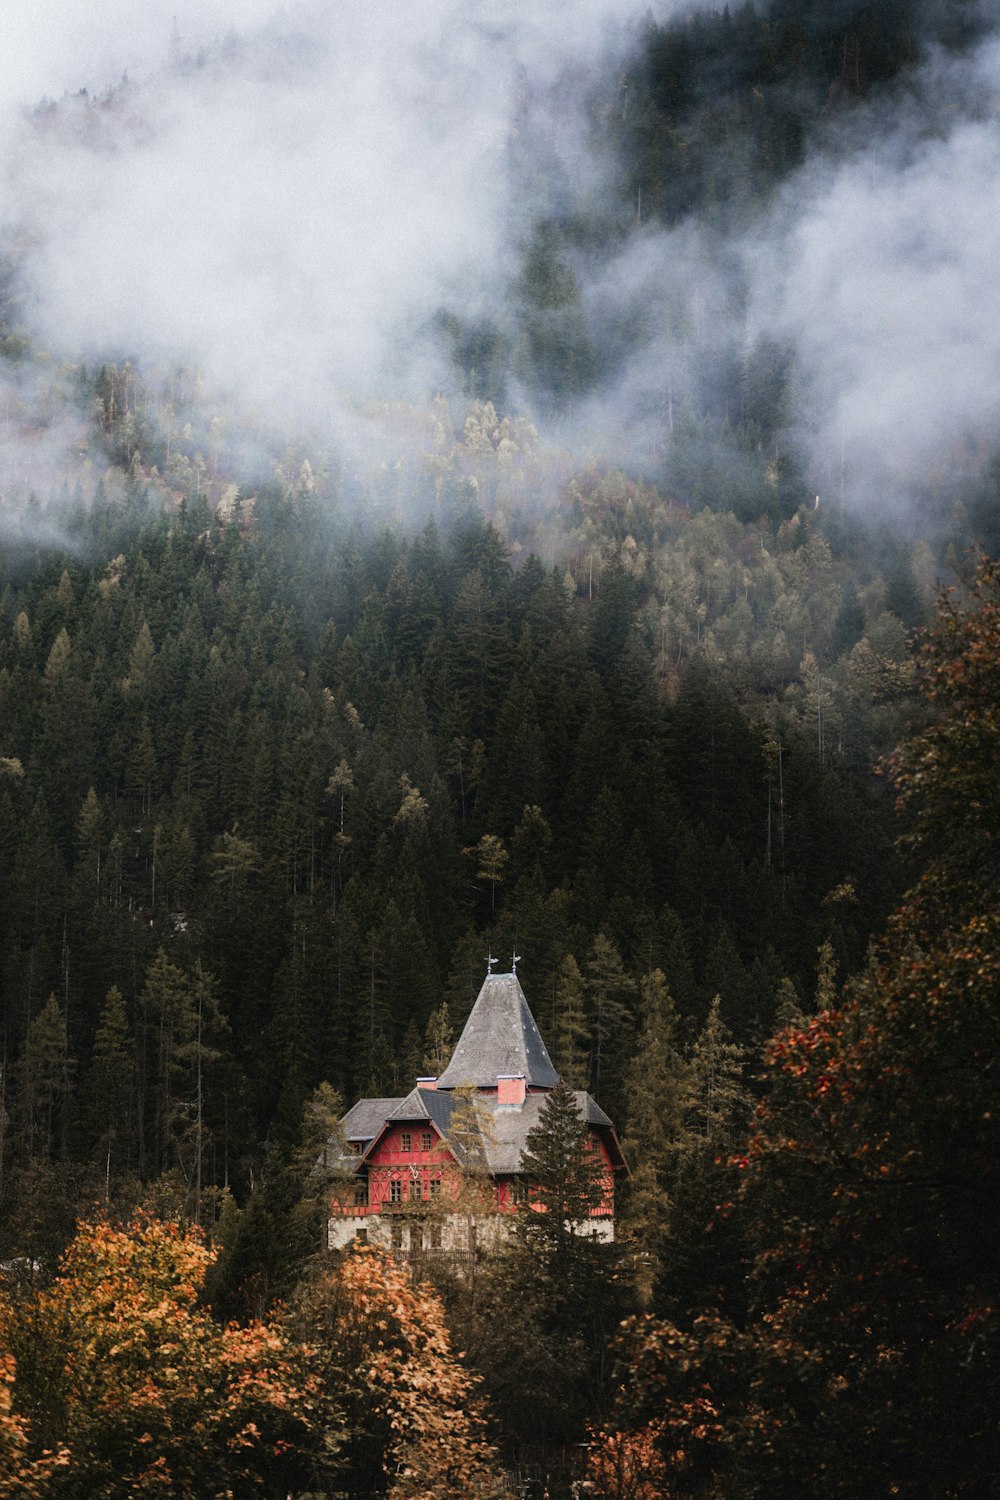 a house in the middle of a forest surrounded by fog